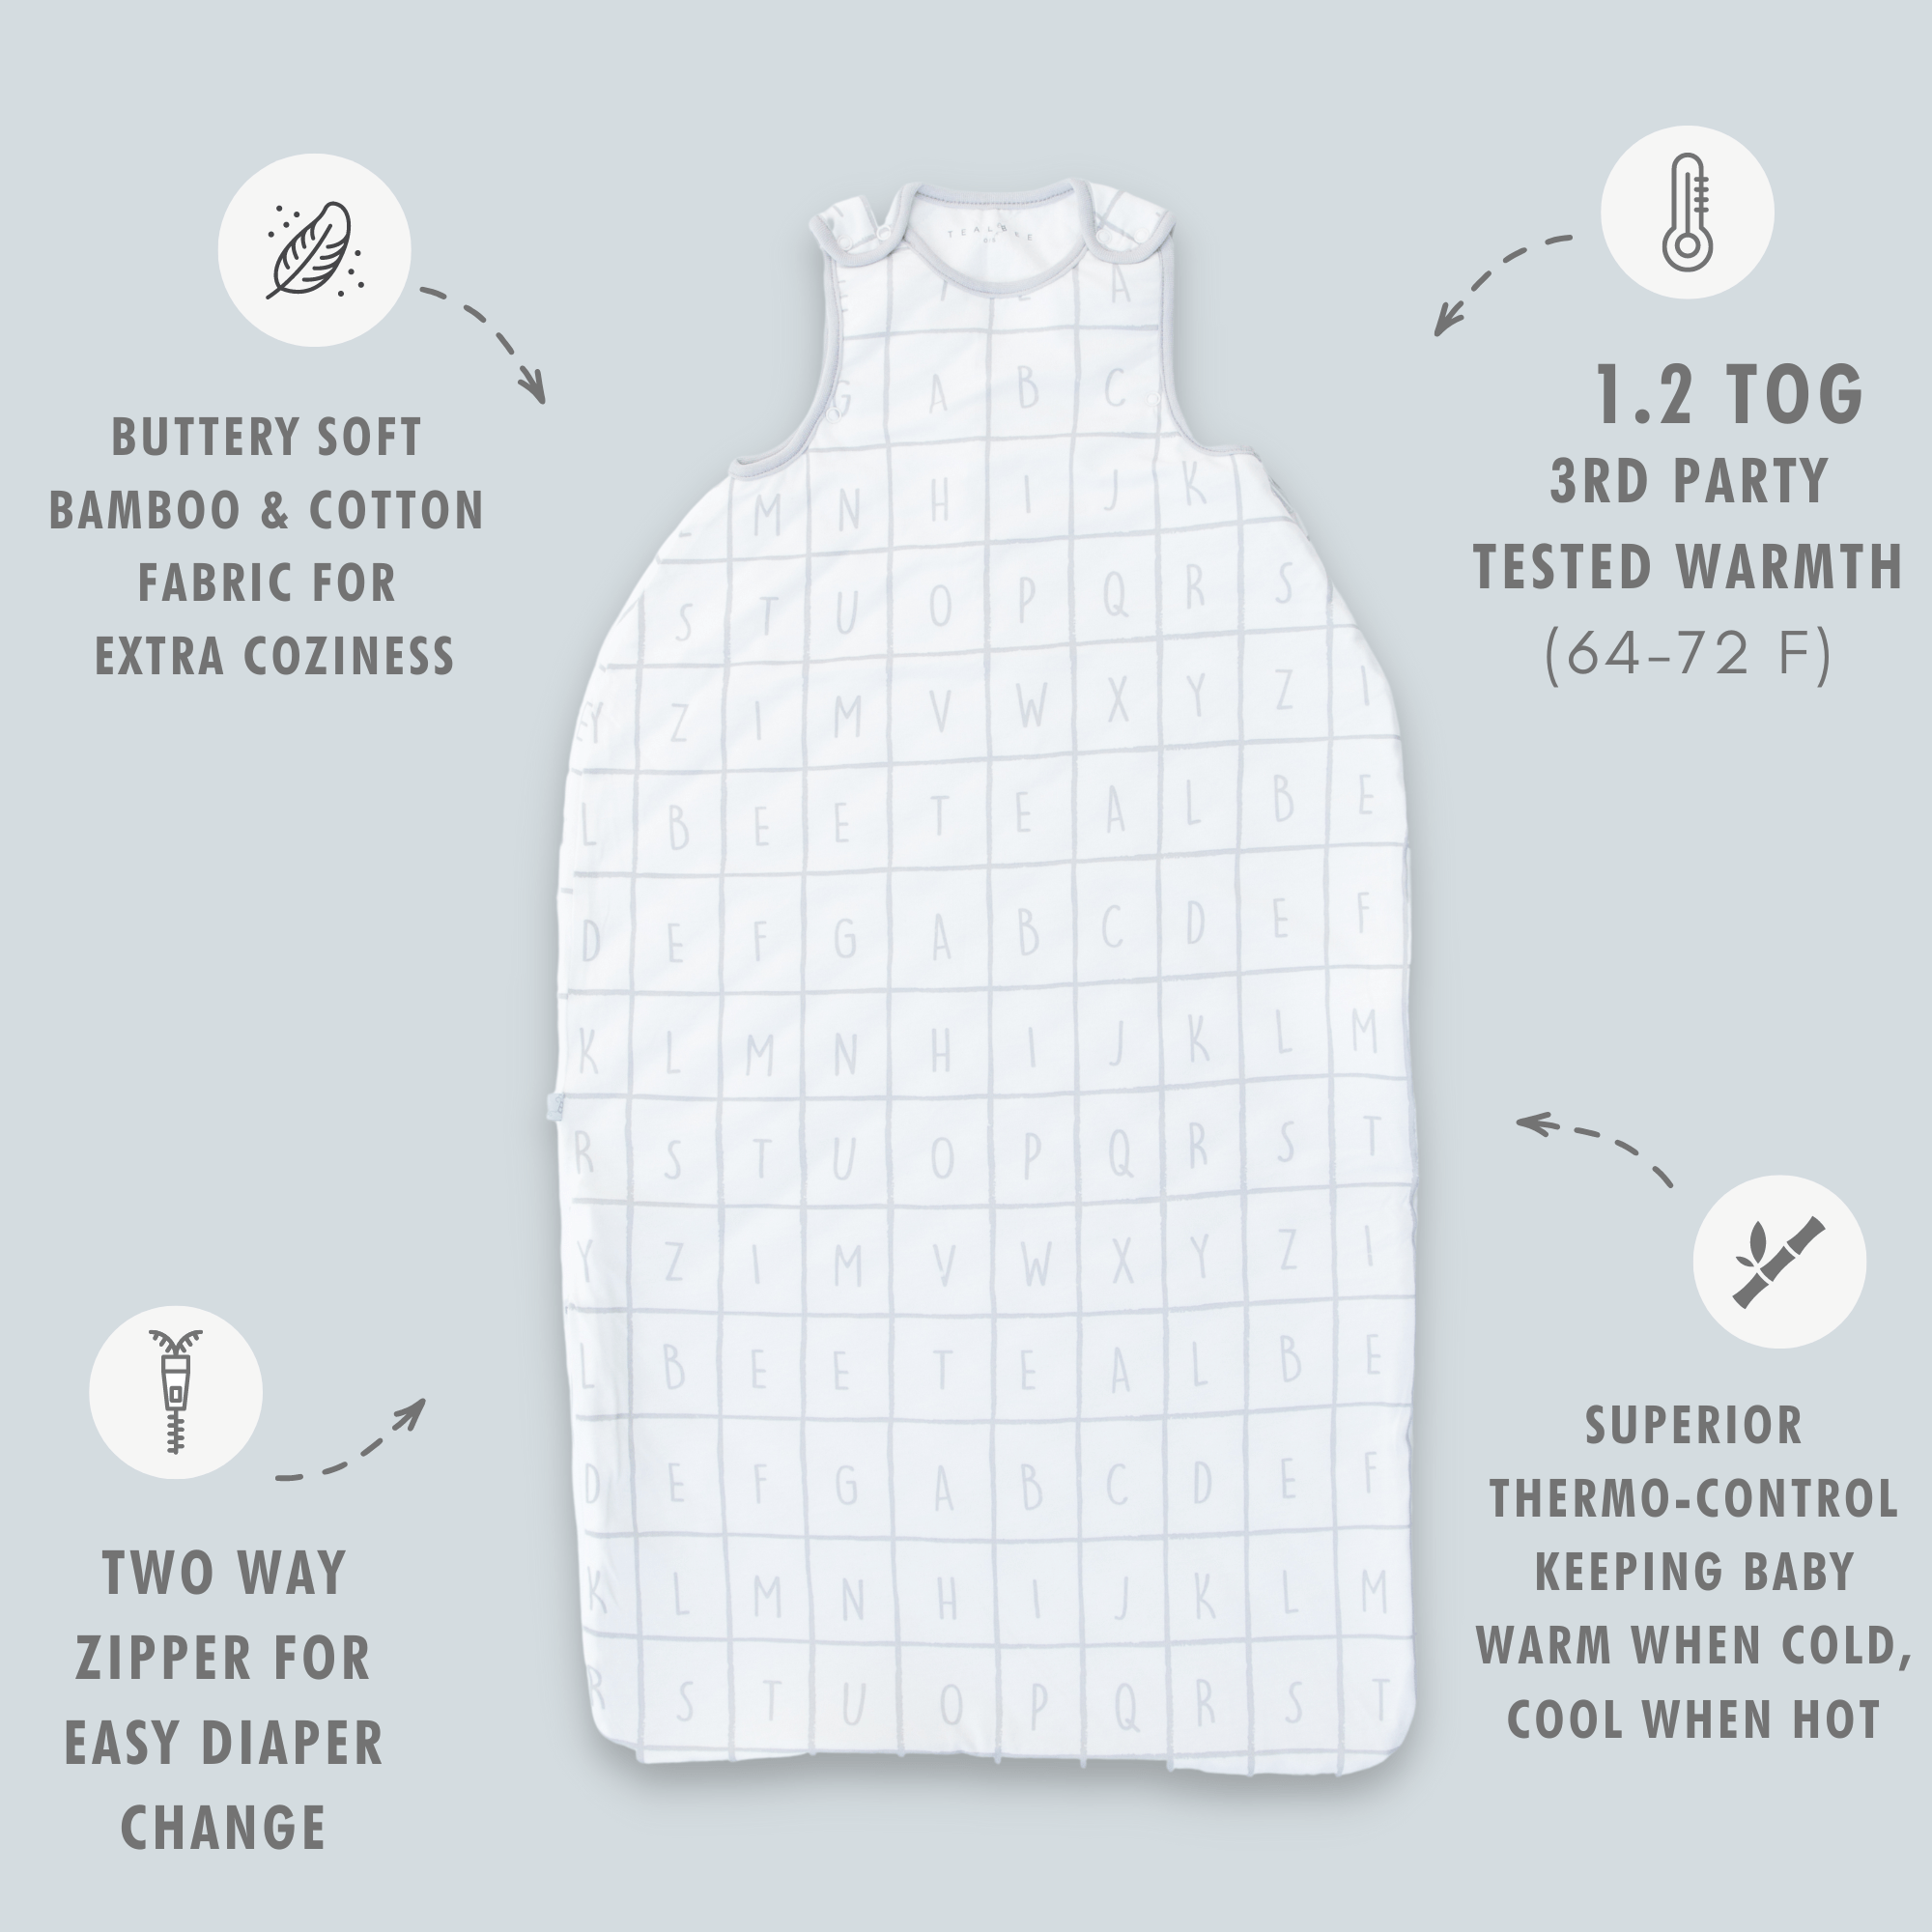 Dreambag sleep sack buttery soft bamboo cotton for extra coziness, 1.2 tog 3rd party tested warm, suitable for 64-72 degrees, two way zipper for easy diagper change, superior thermo control keeping baby warm when cold, cool when hot